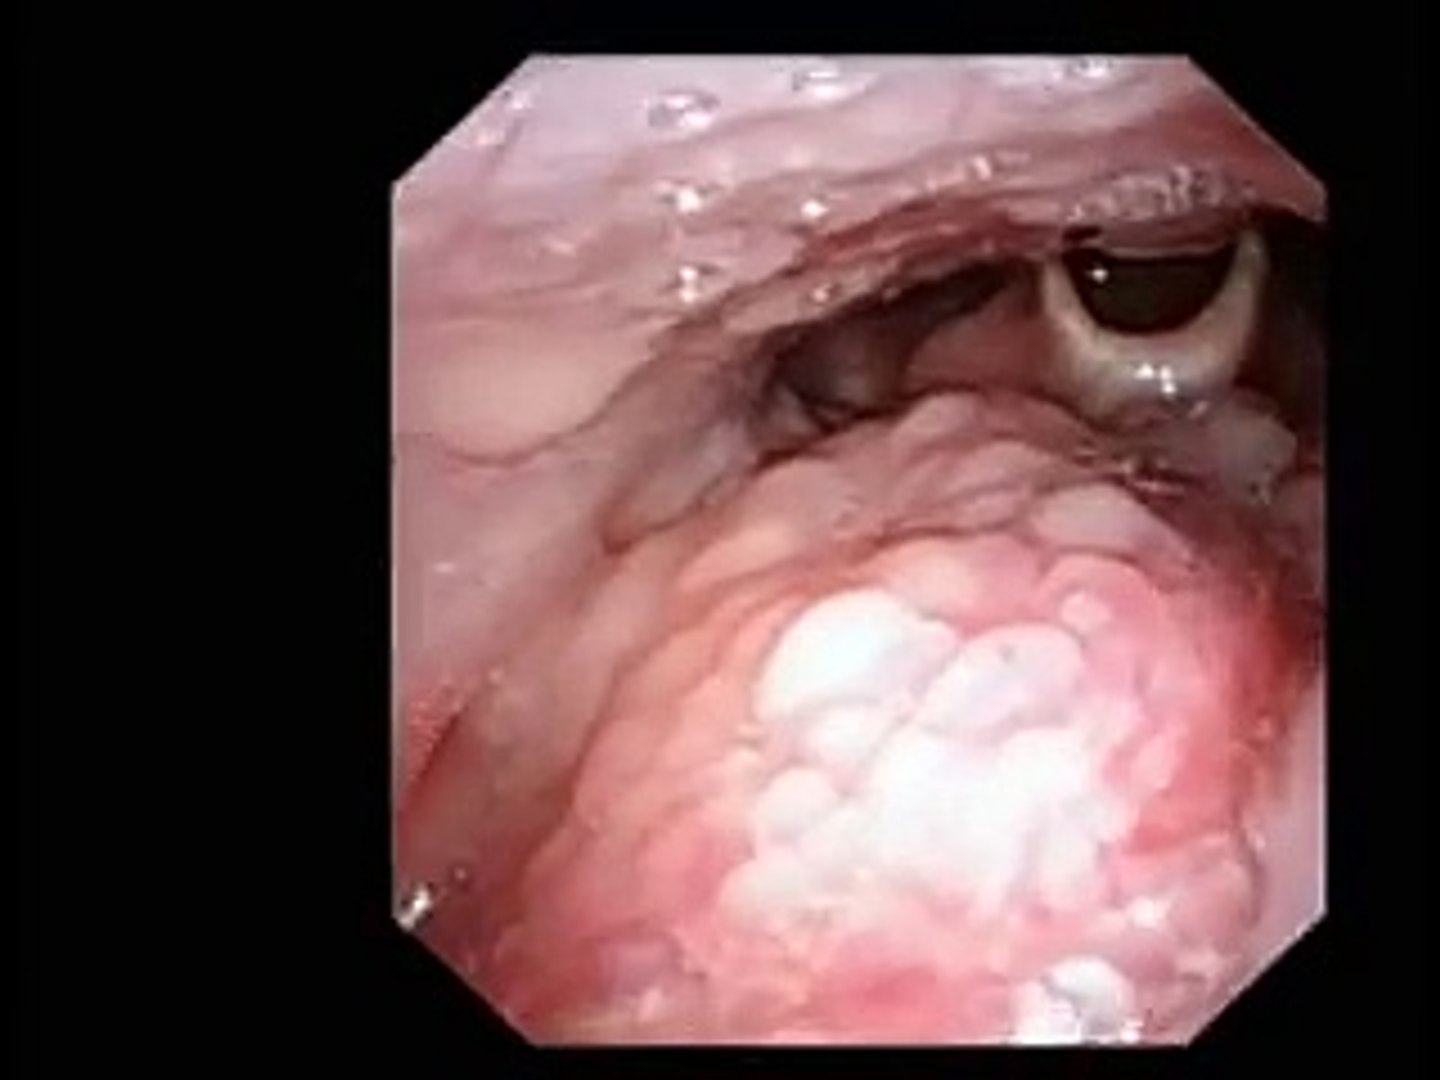 Sinus Infection Seeing Inside The Nose Endoscopy Of The Nose In Sinus Infection Video Dailymotion